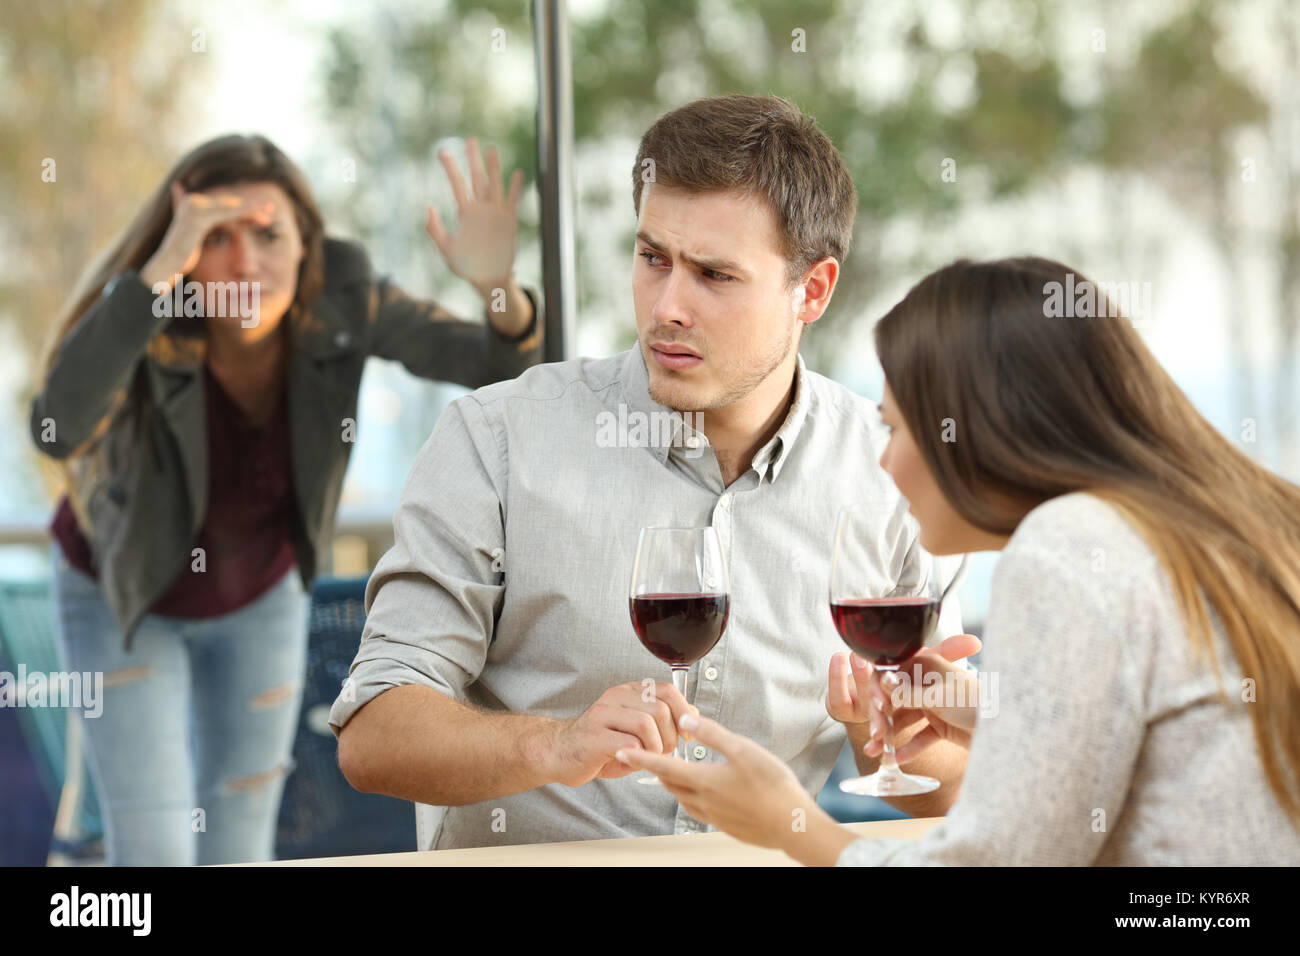 Obsessed ex girlfriend spying on an annoyed couple dating in a restaurant Stock Photo